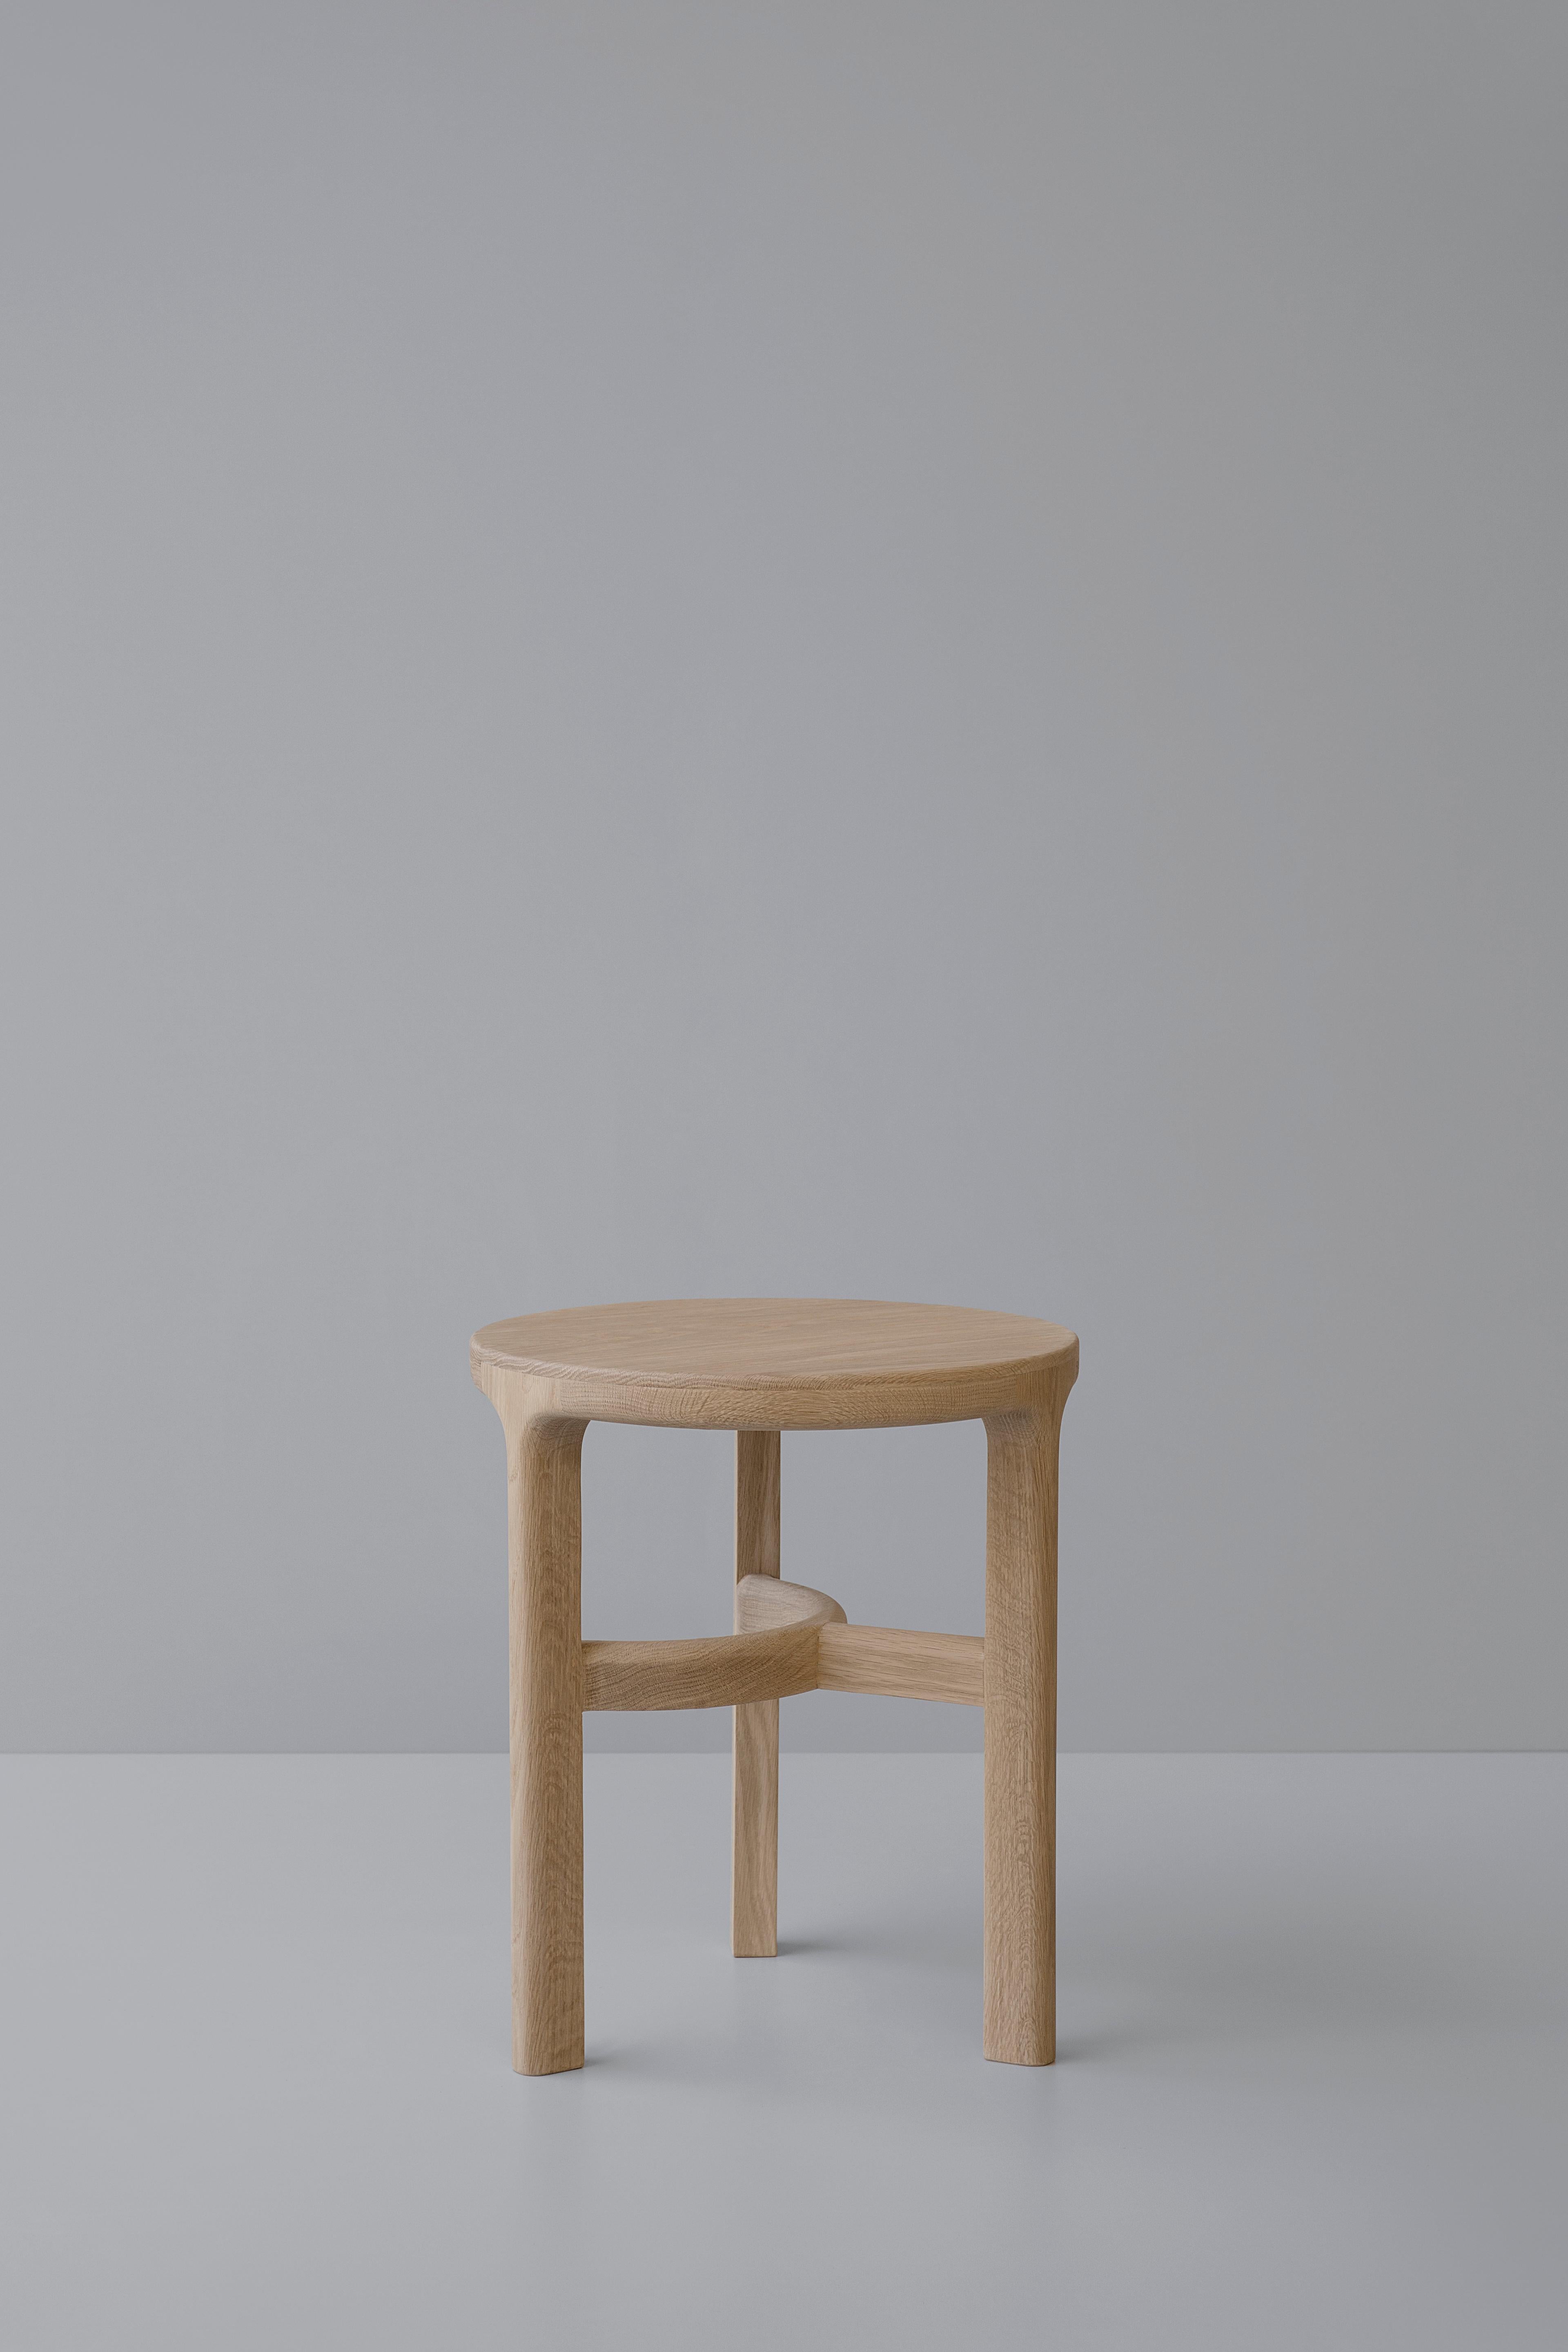 Trasiego side table by Arturo Verástegui
Dimensions: D 47 x W 47 x H 54 cm
Materials: oak wood.

Natural white oak side table.

Sebastián Angeles is an Industrial Designer originally from Mexico City who graduated from the Anáhuac Mexico